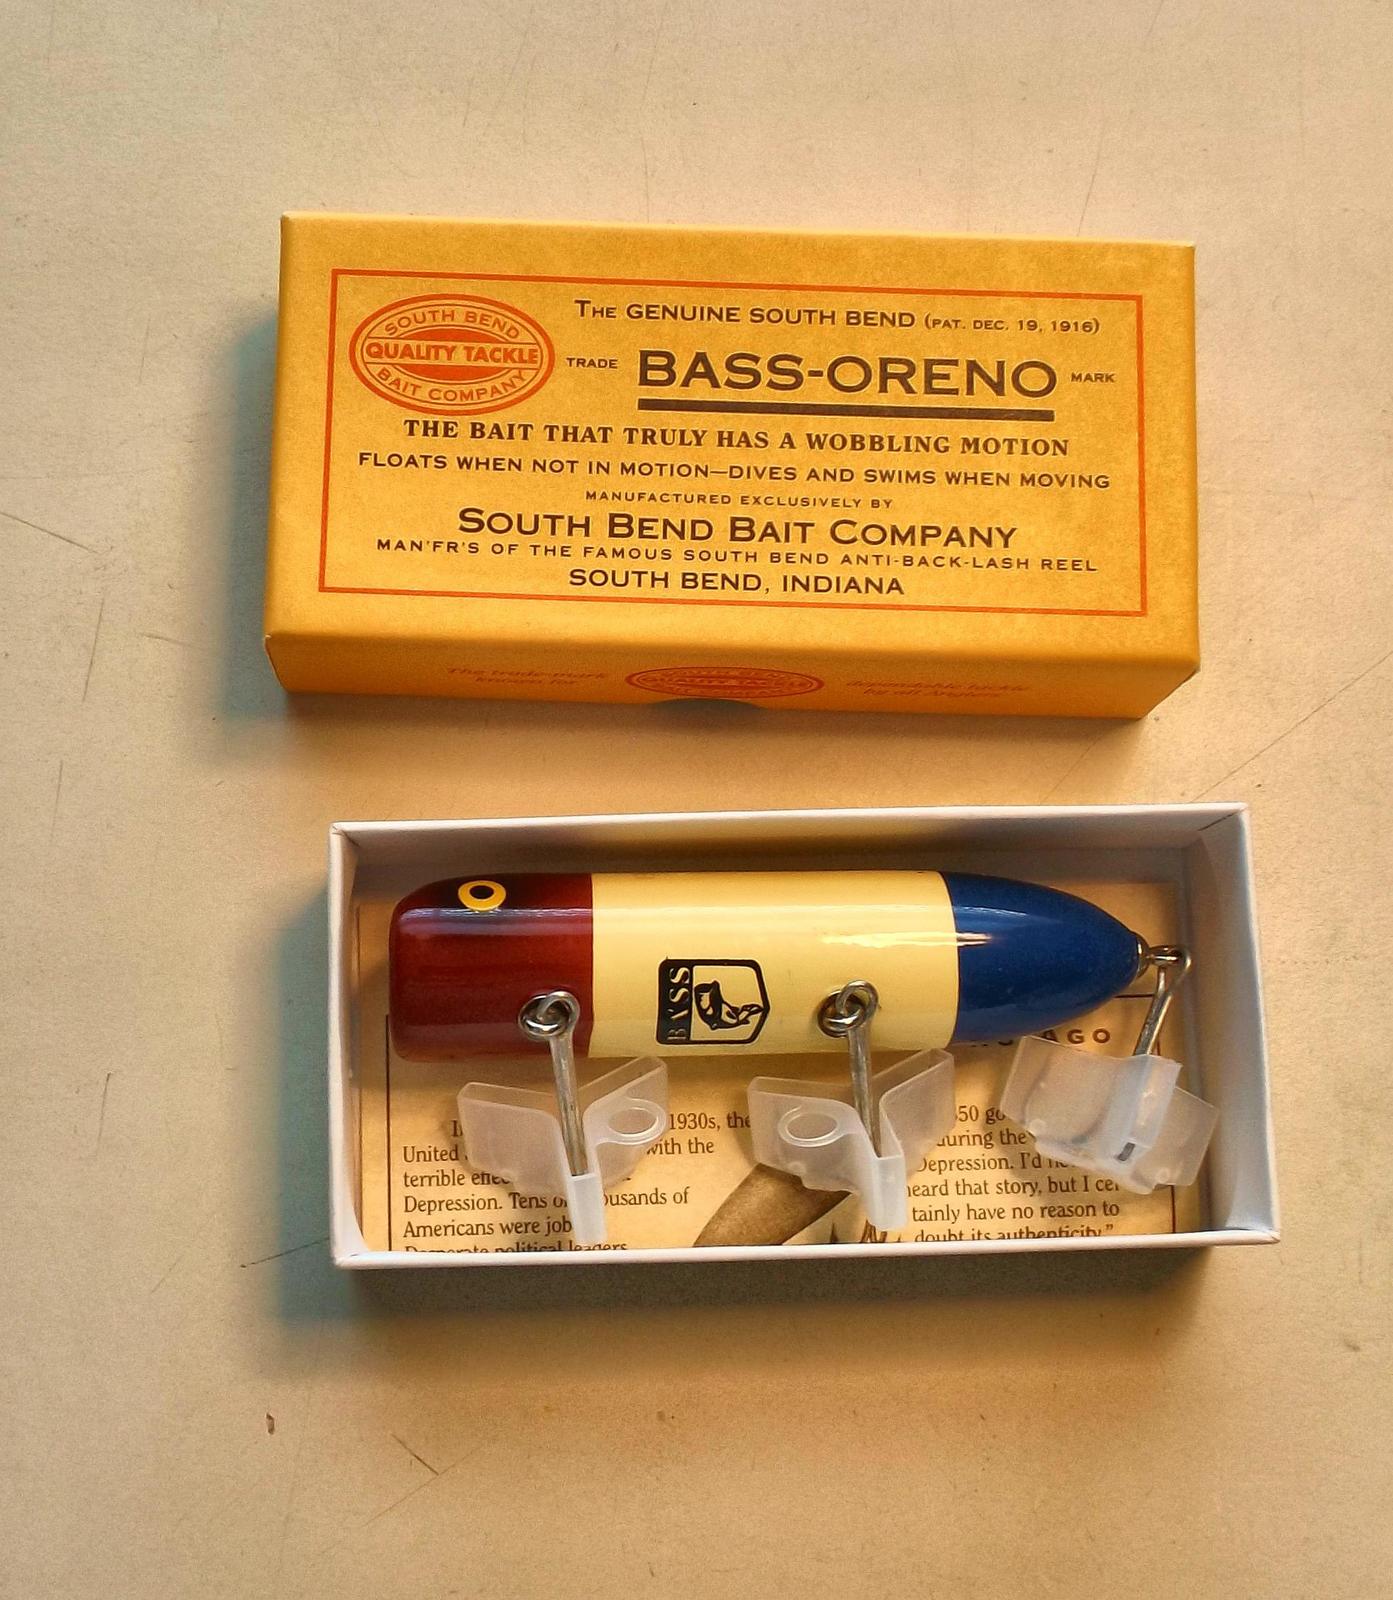 A Vintage Red, White, and Blue Bass-oreno Fishing Lure